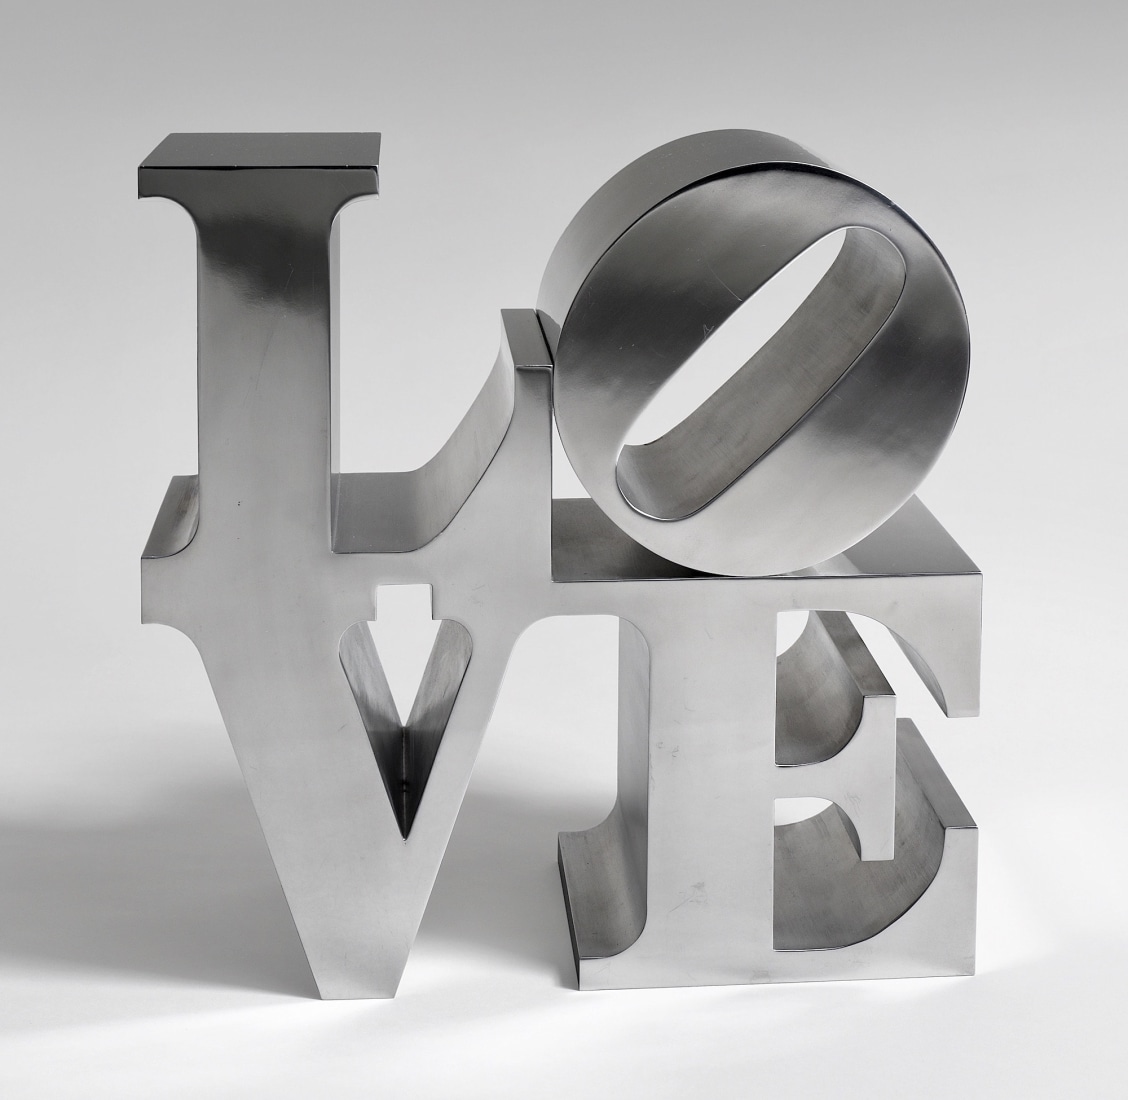 Robert Indiana's aluminum, hand-cut and mirror-finished LOVE sculpture, consisting of a letter L and a tilted letter O on top of the letters V and E.